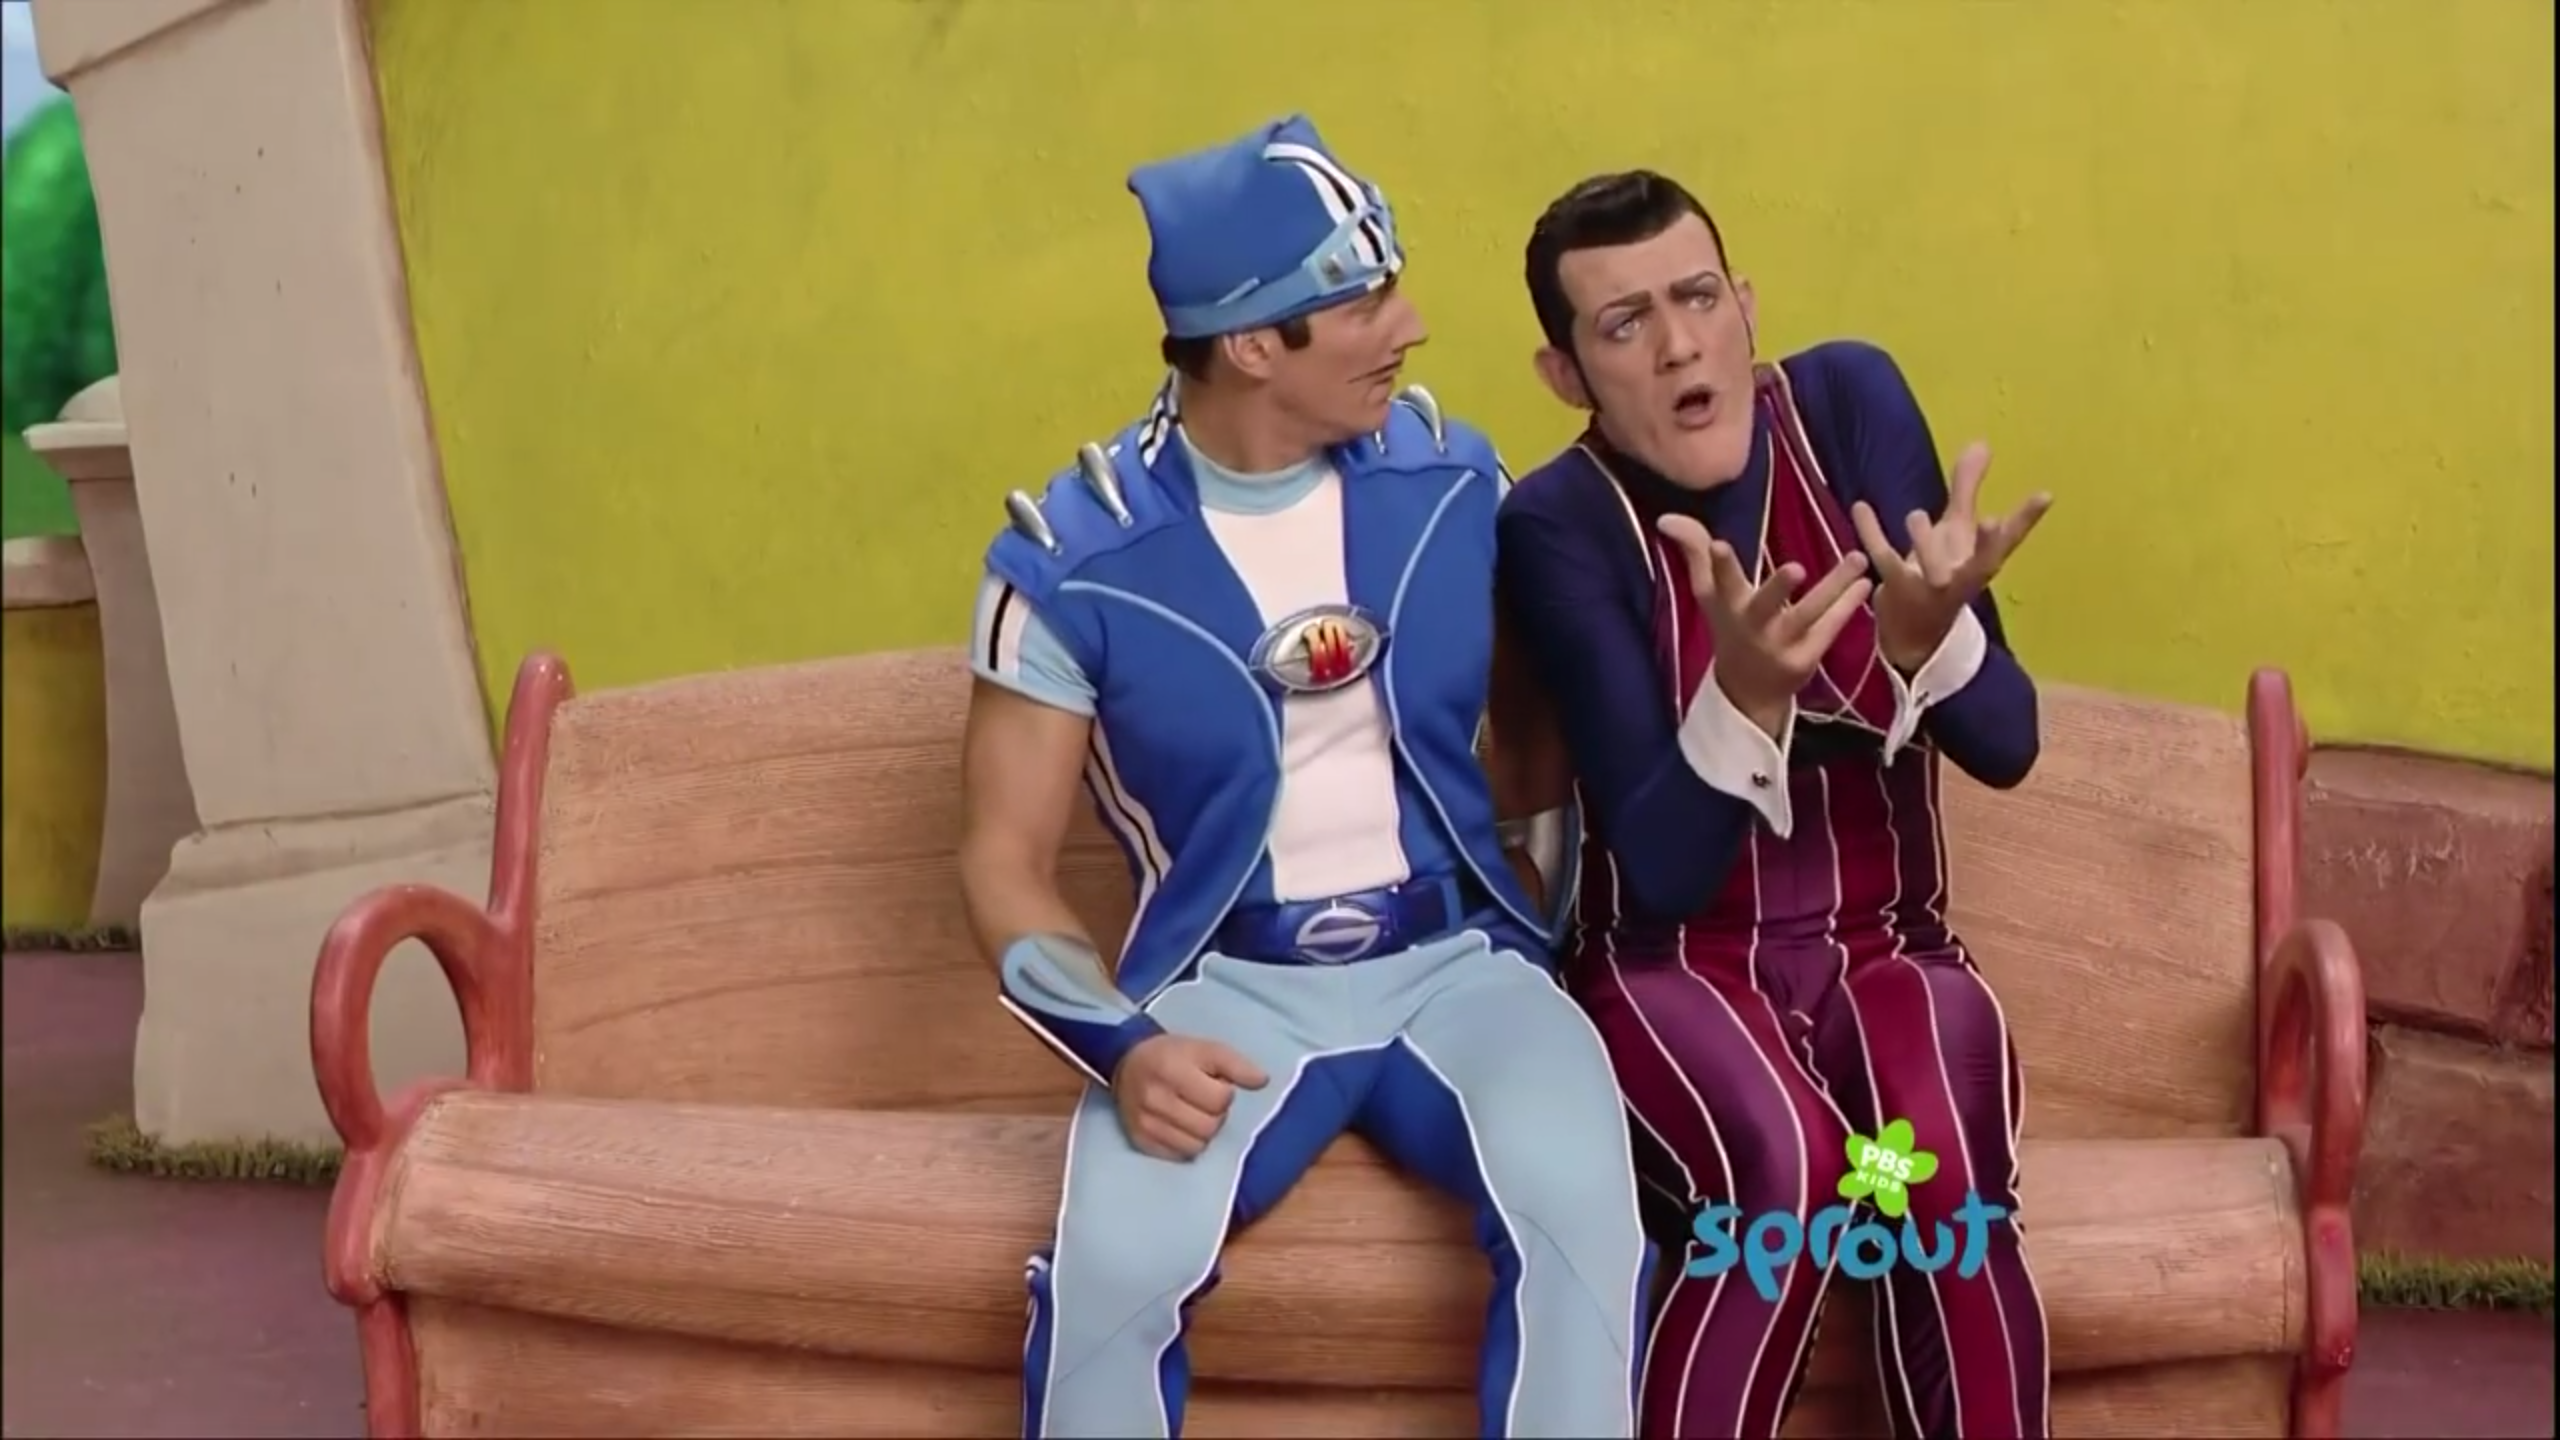 Lazytown Photo: Robbie Rotten and Sportacus.